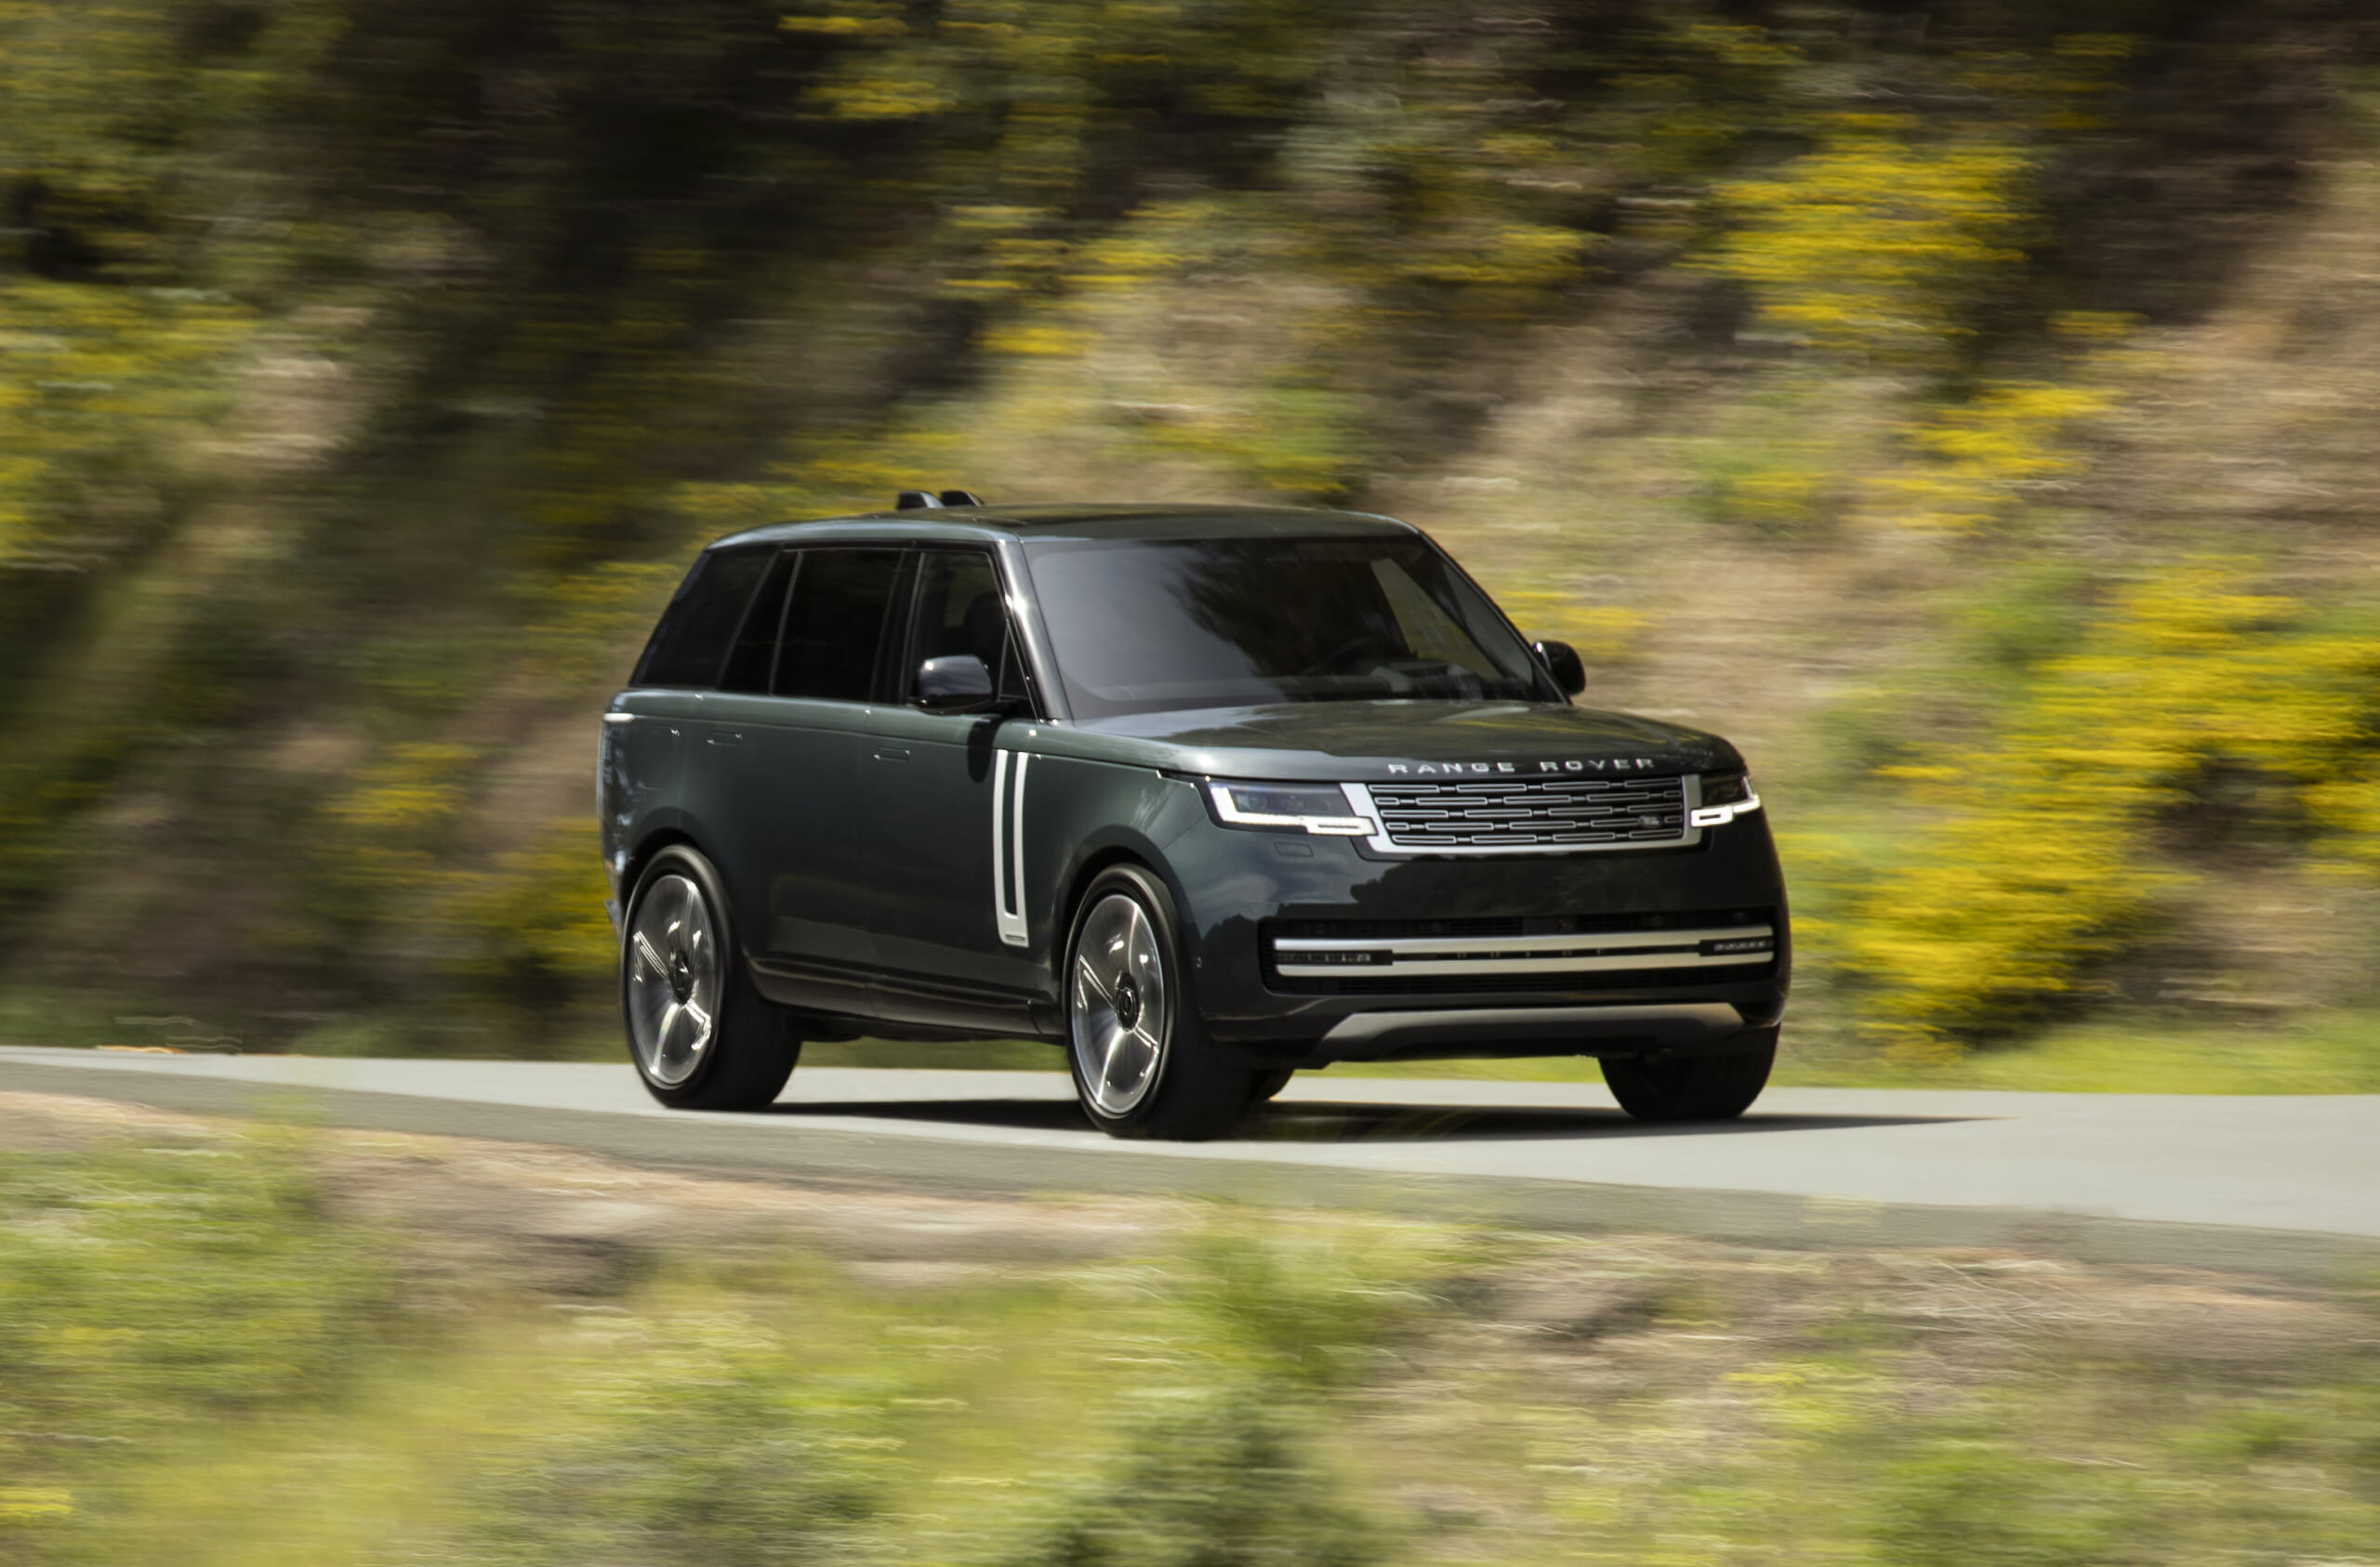 Ride Along On An Epic Range Rover Road Trip Through California Wine Country